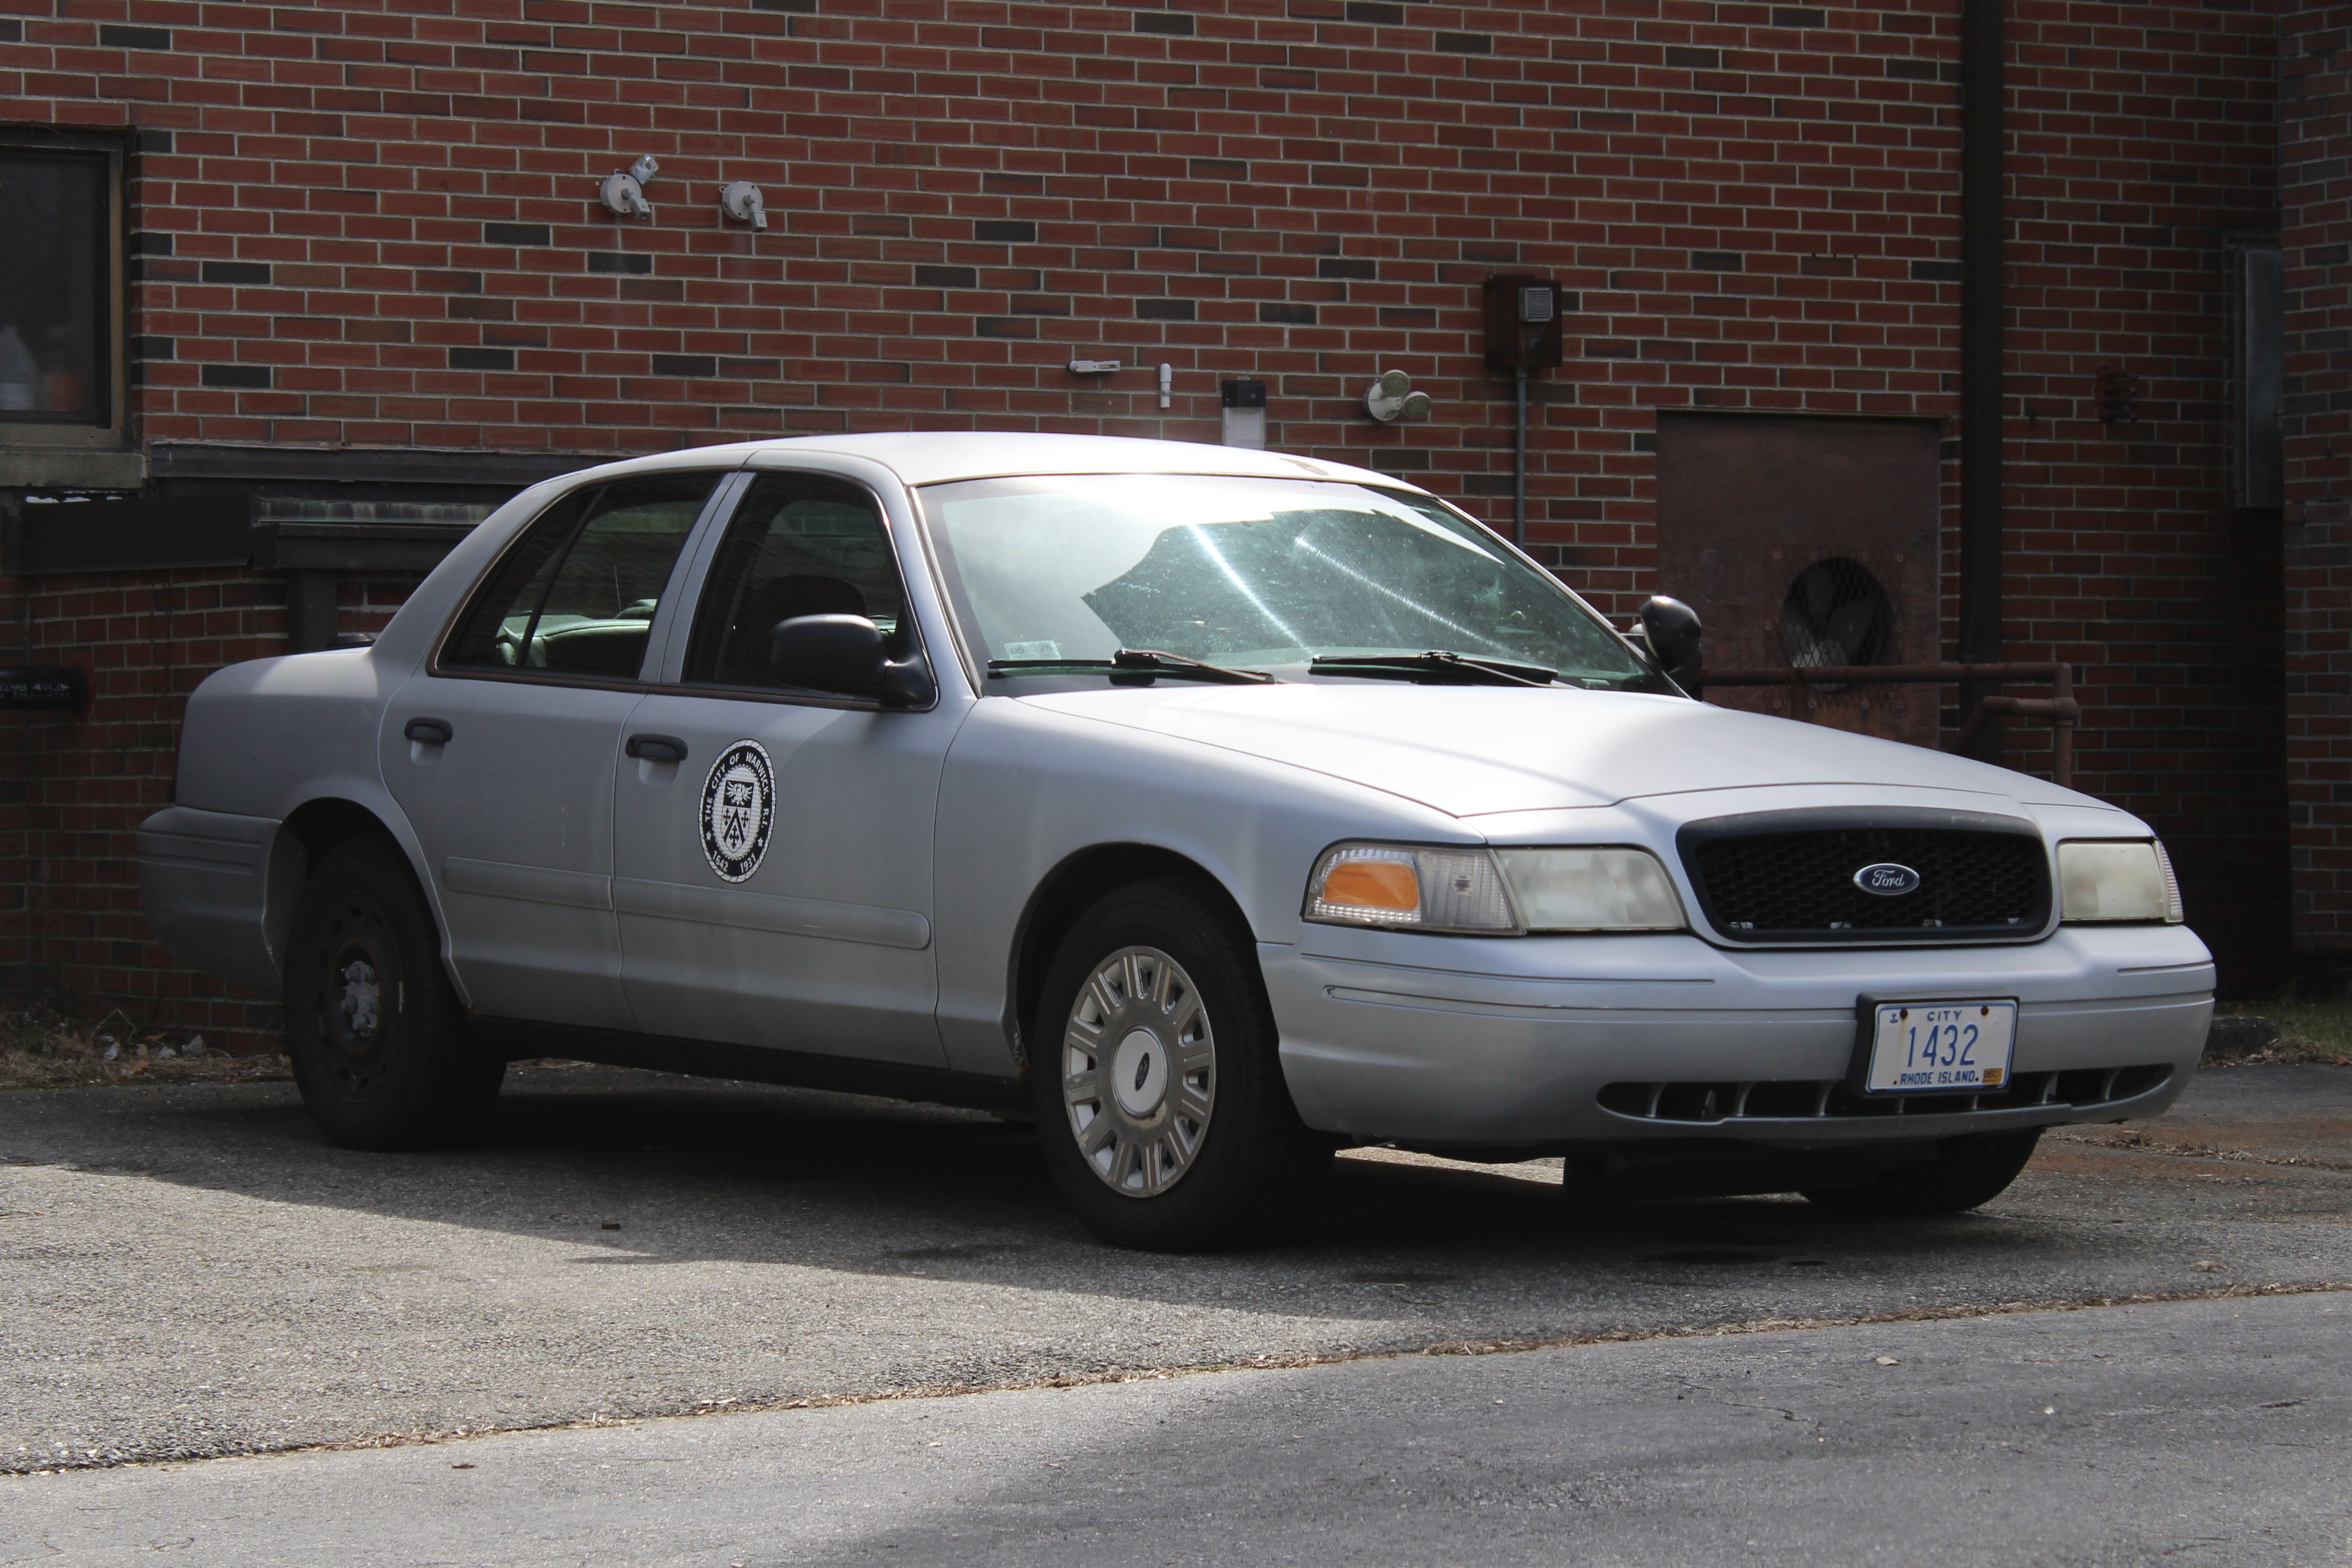 A photo  of Warwick Public Works
            Car 1432, a 2003-2005 Ford Crown Victoria Police Interceptor             taken by @riemergencyvehicles